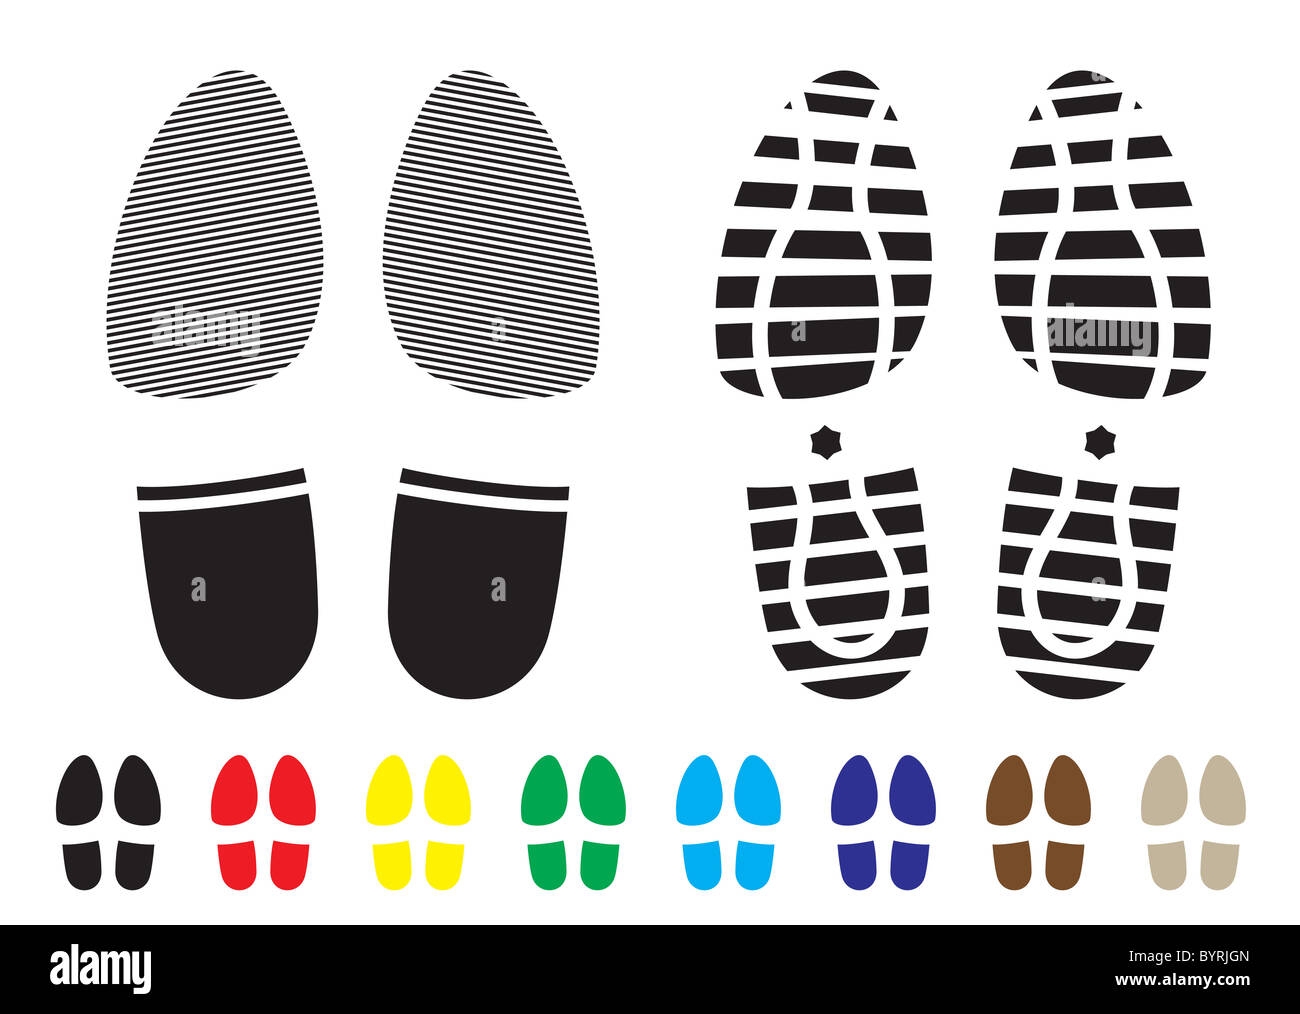 Shoe Print Pattern With Outline And Template Samples Stock Photo Alamy